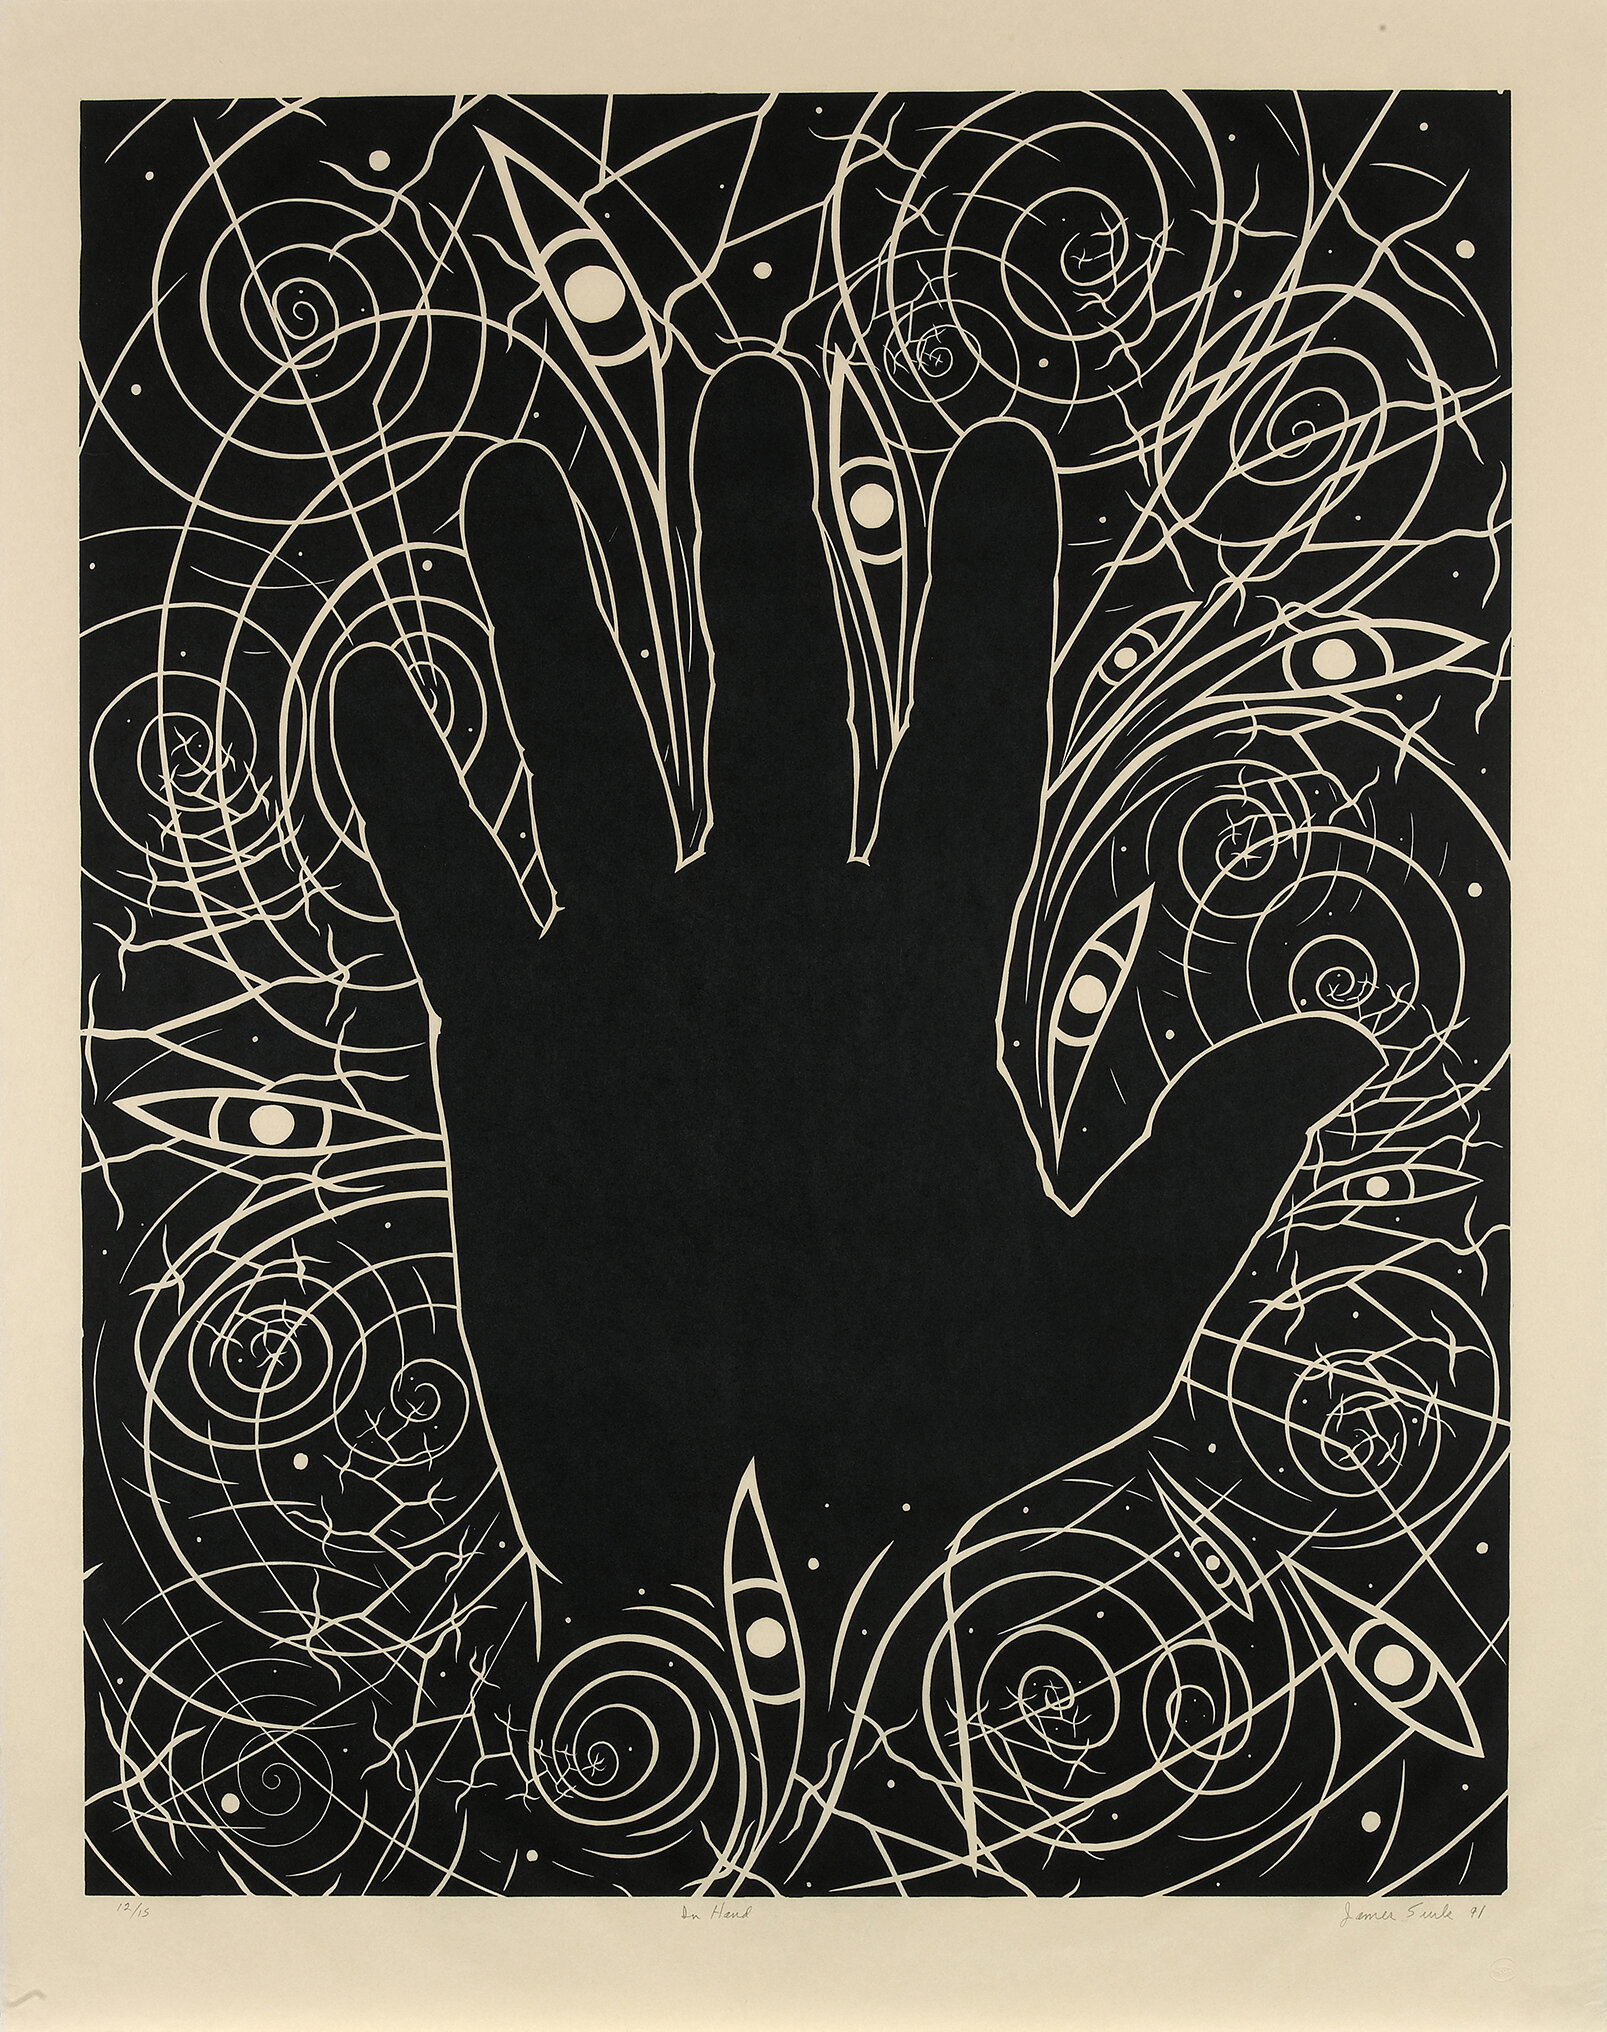 In Hand, 1991